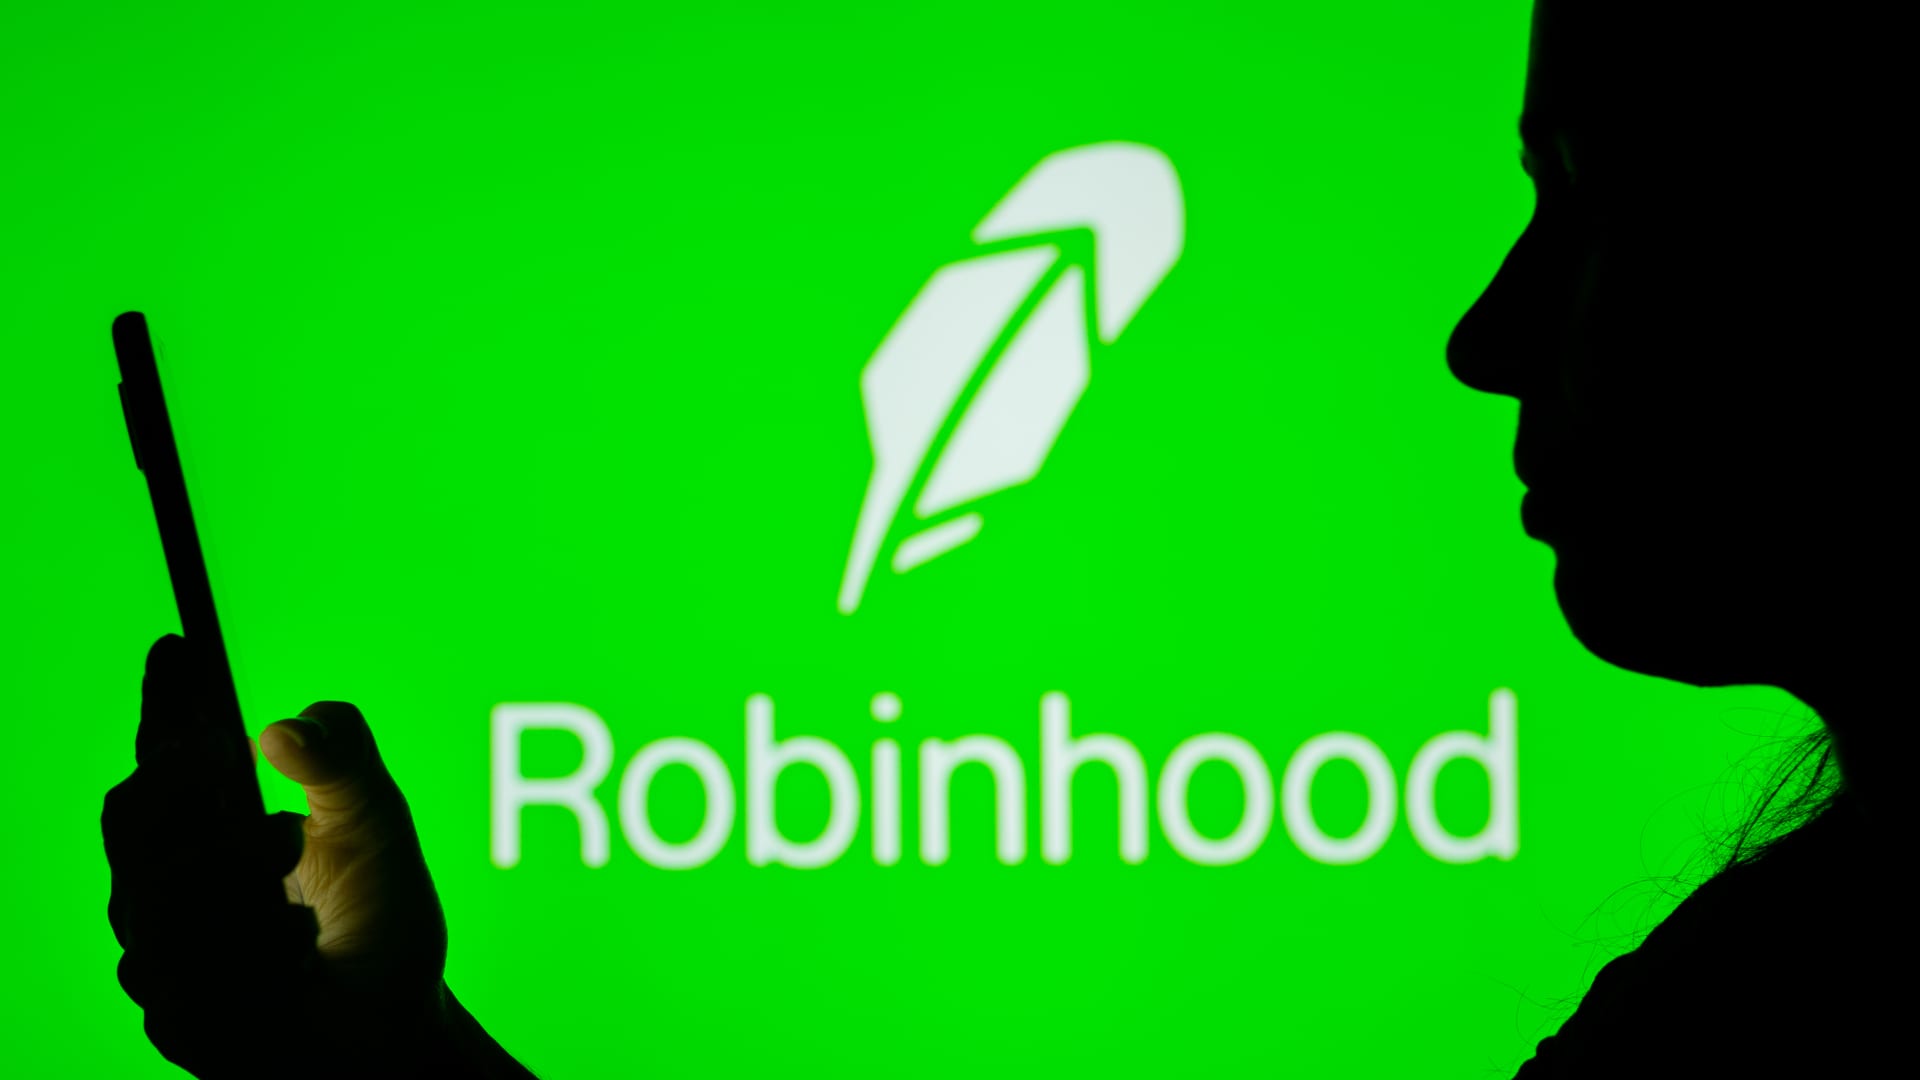 Share trading platform Robinhood to launch in UK after two failed attempts